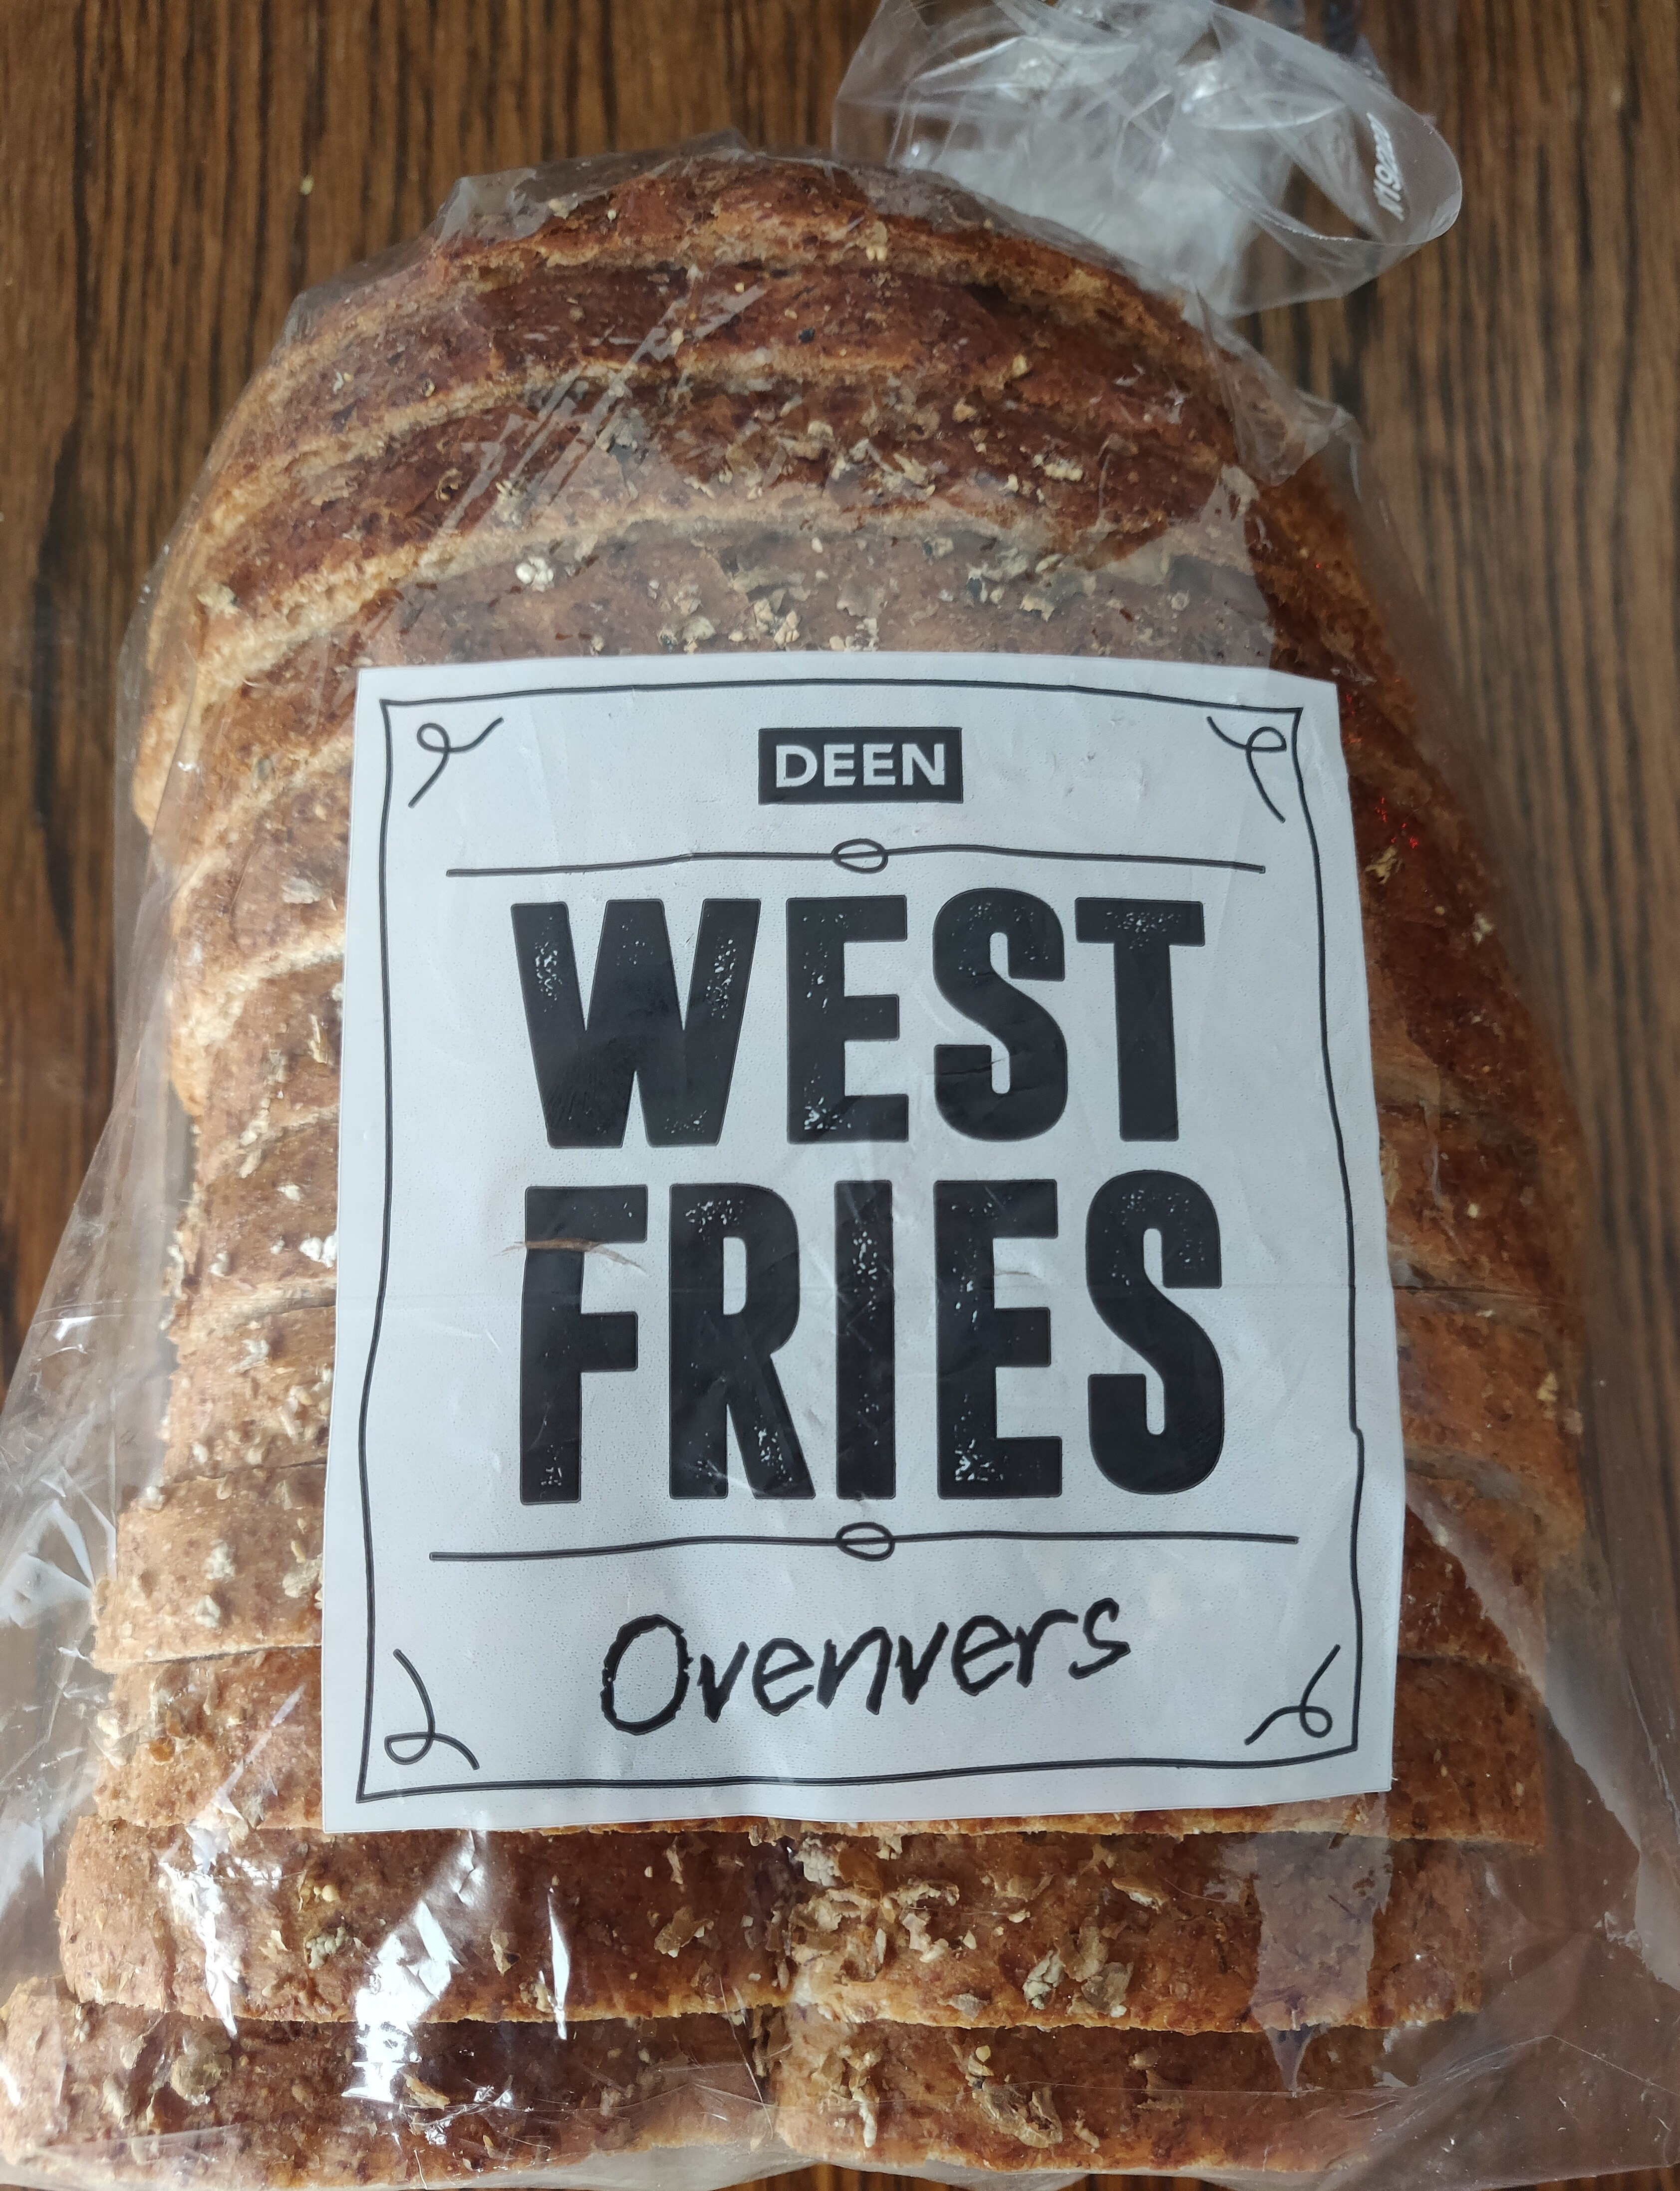 West fries ovenvers - Product